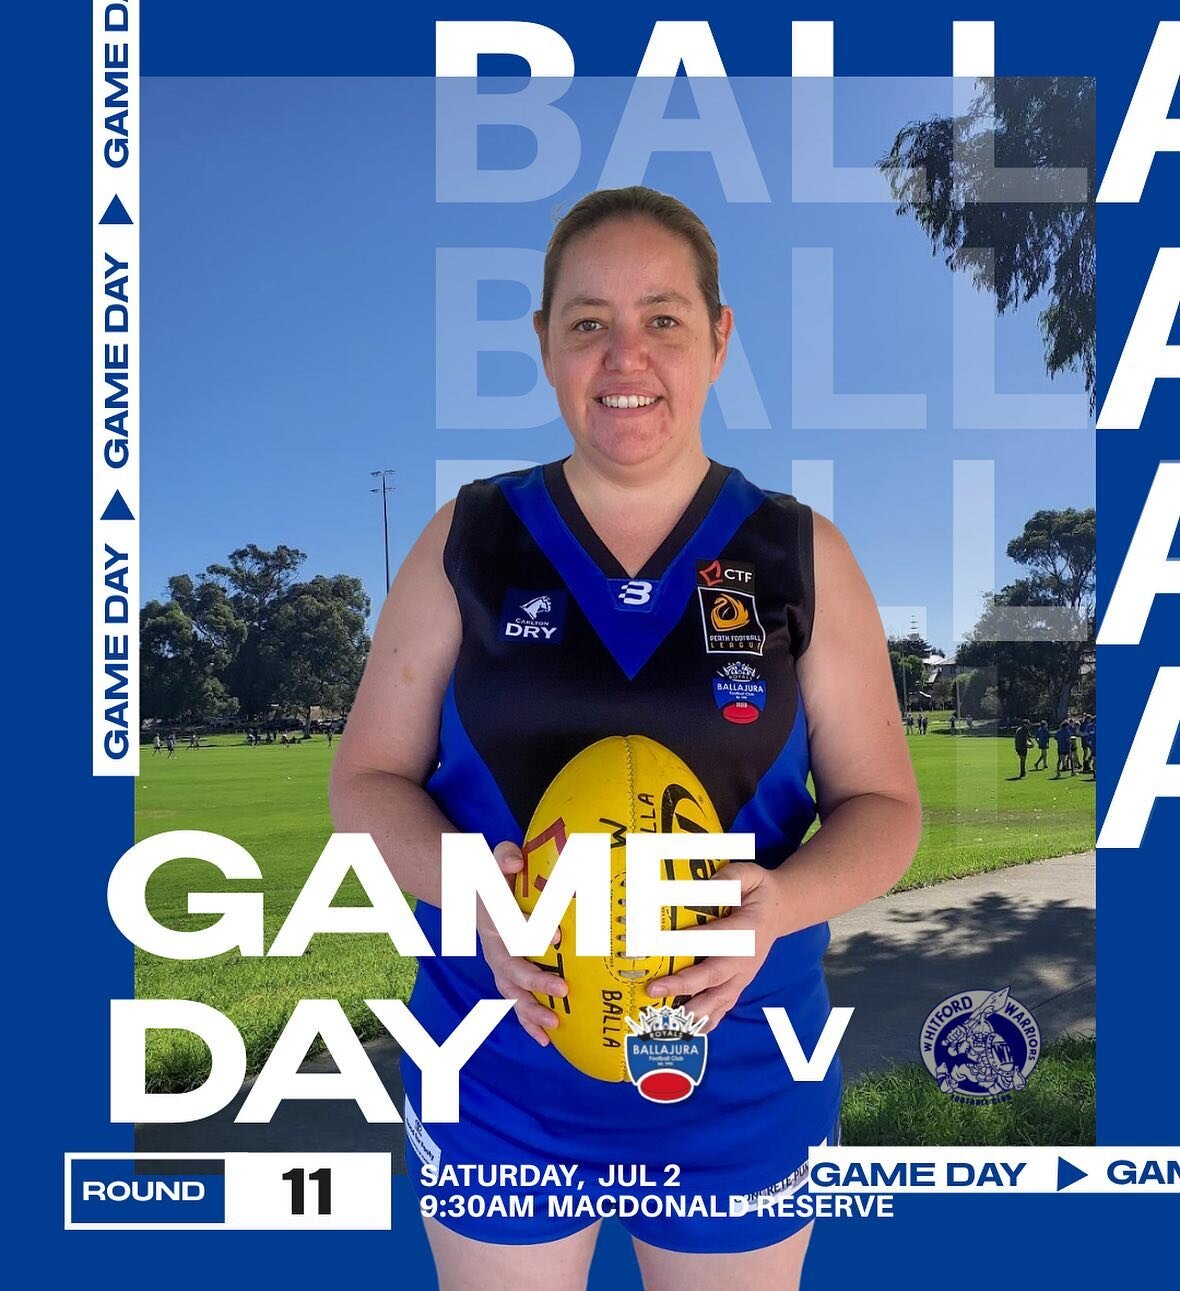 Round 11 

This Saturday come down to MacDonald Reserve and support our girls as they take on Whitfords 

9:30am bounce down